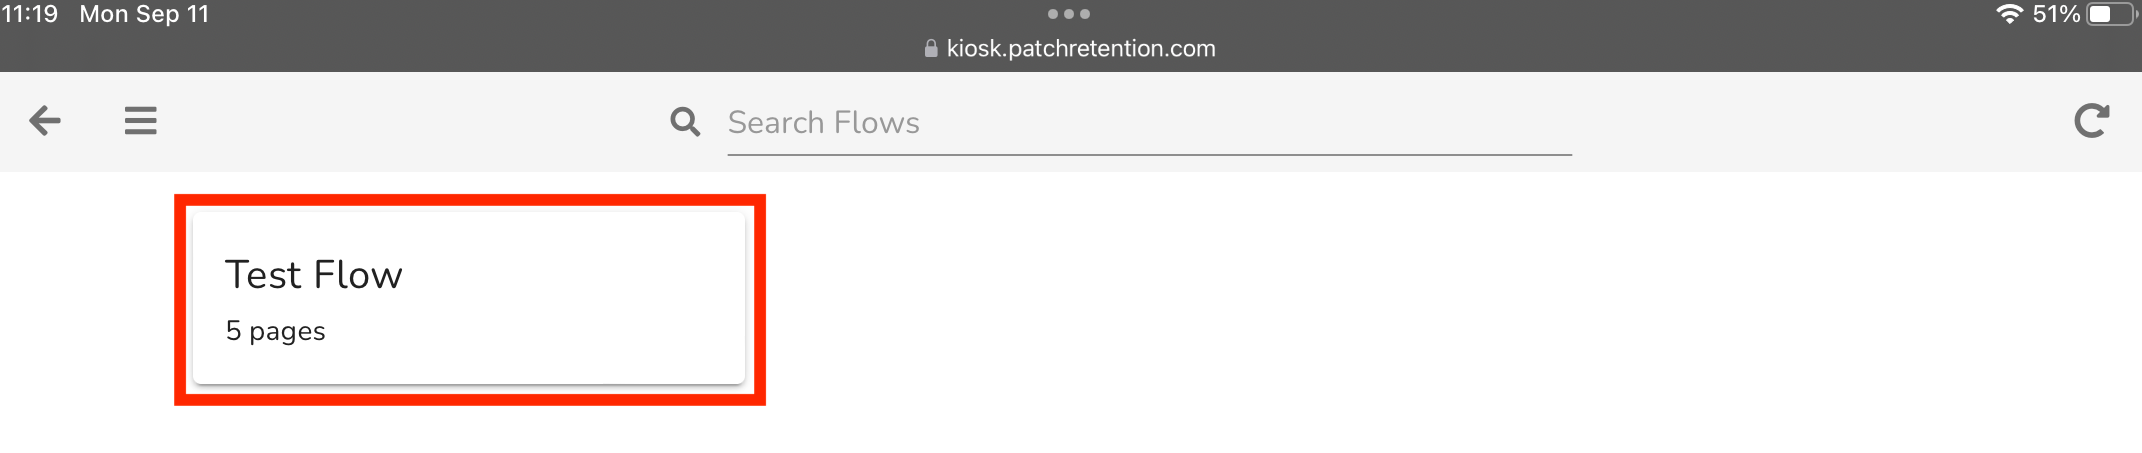 How to Install the Patch Kiosk Web App9.PNG